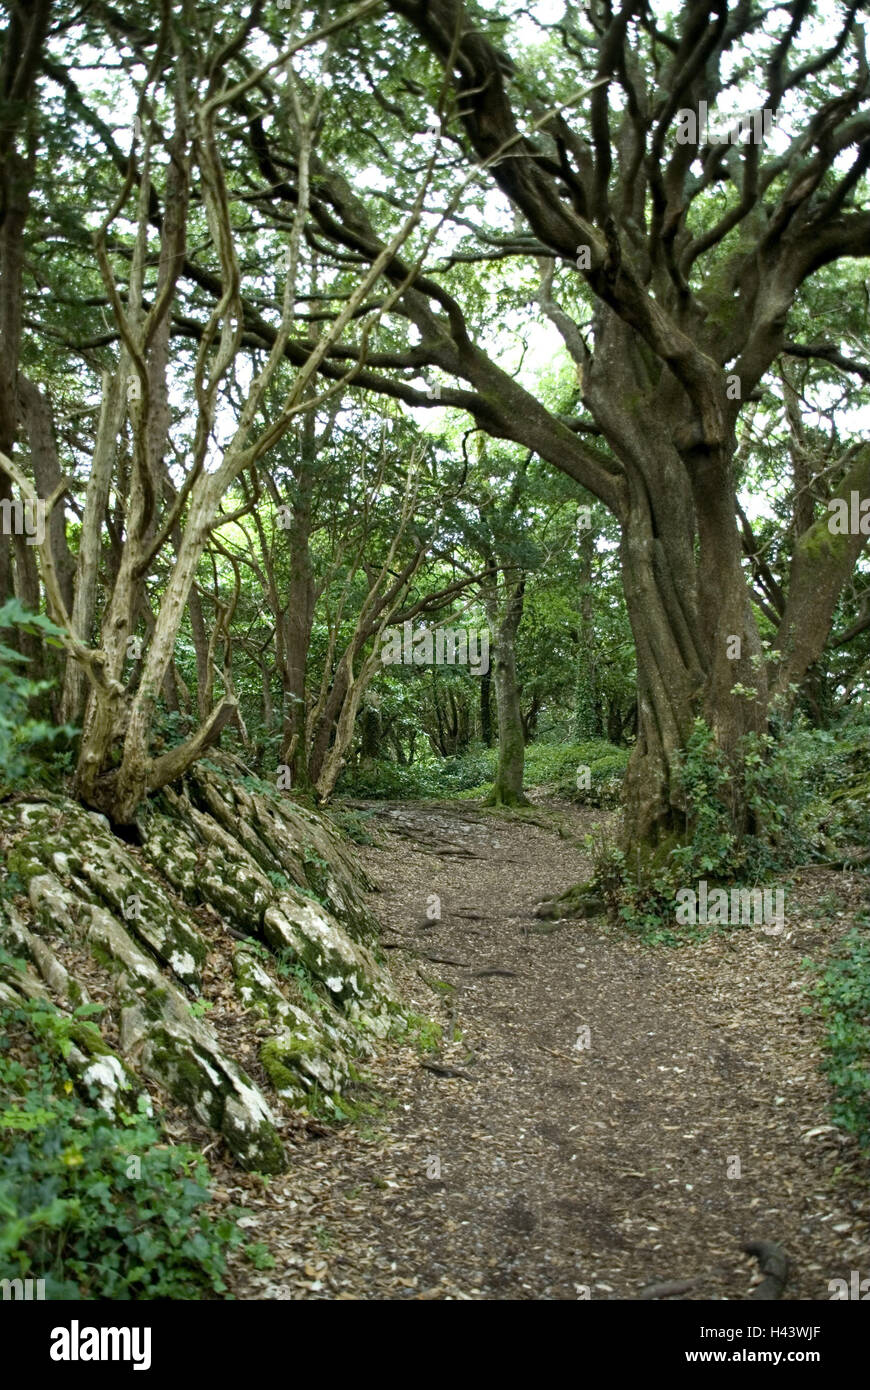 Ireland, Munster, Kerry, Killarney, national park, trees, detail, nature, scenery, wood, wildly, originally, natural, vegetation, way, forest way, path, deserted, Stock Photo